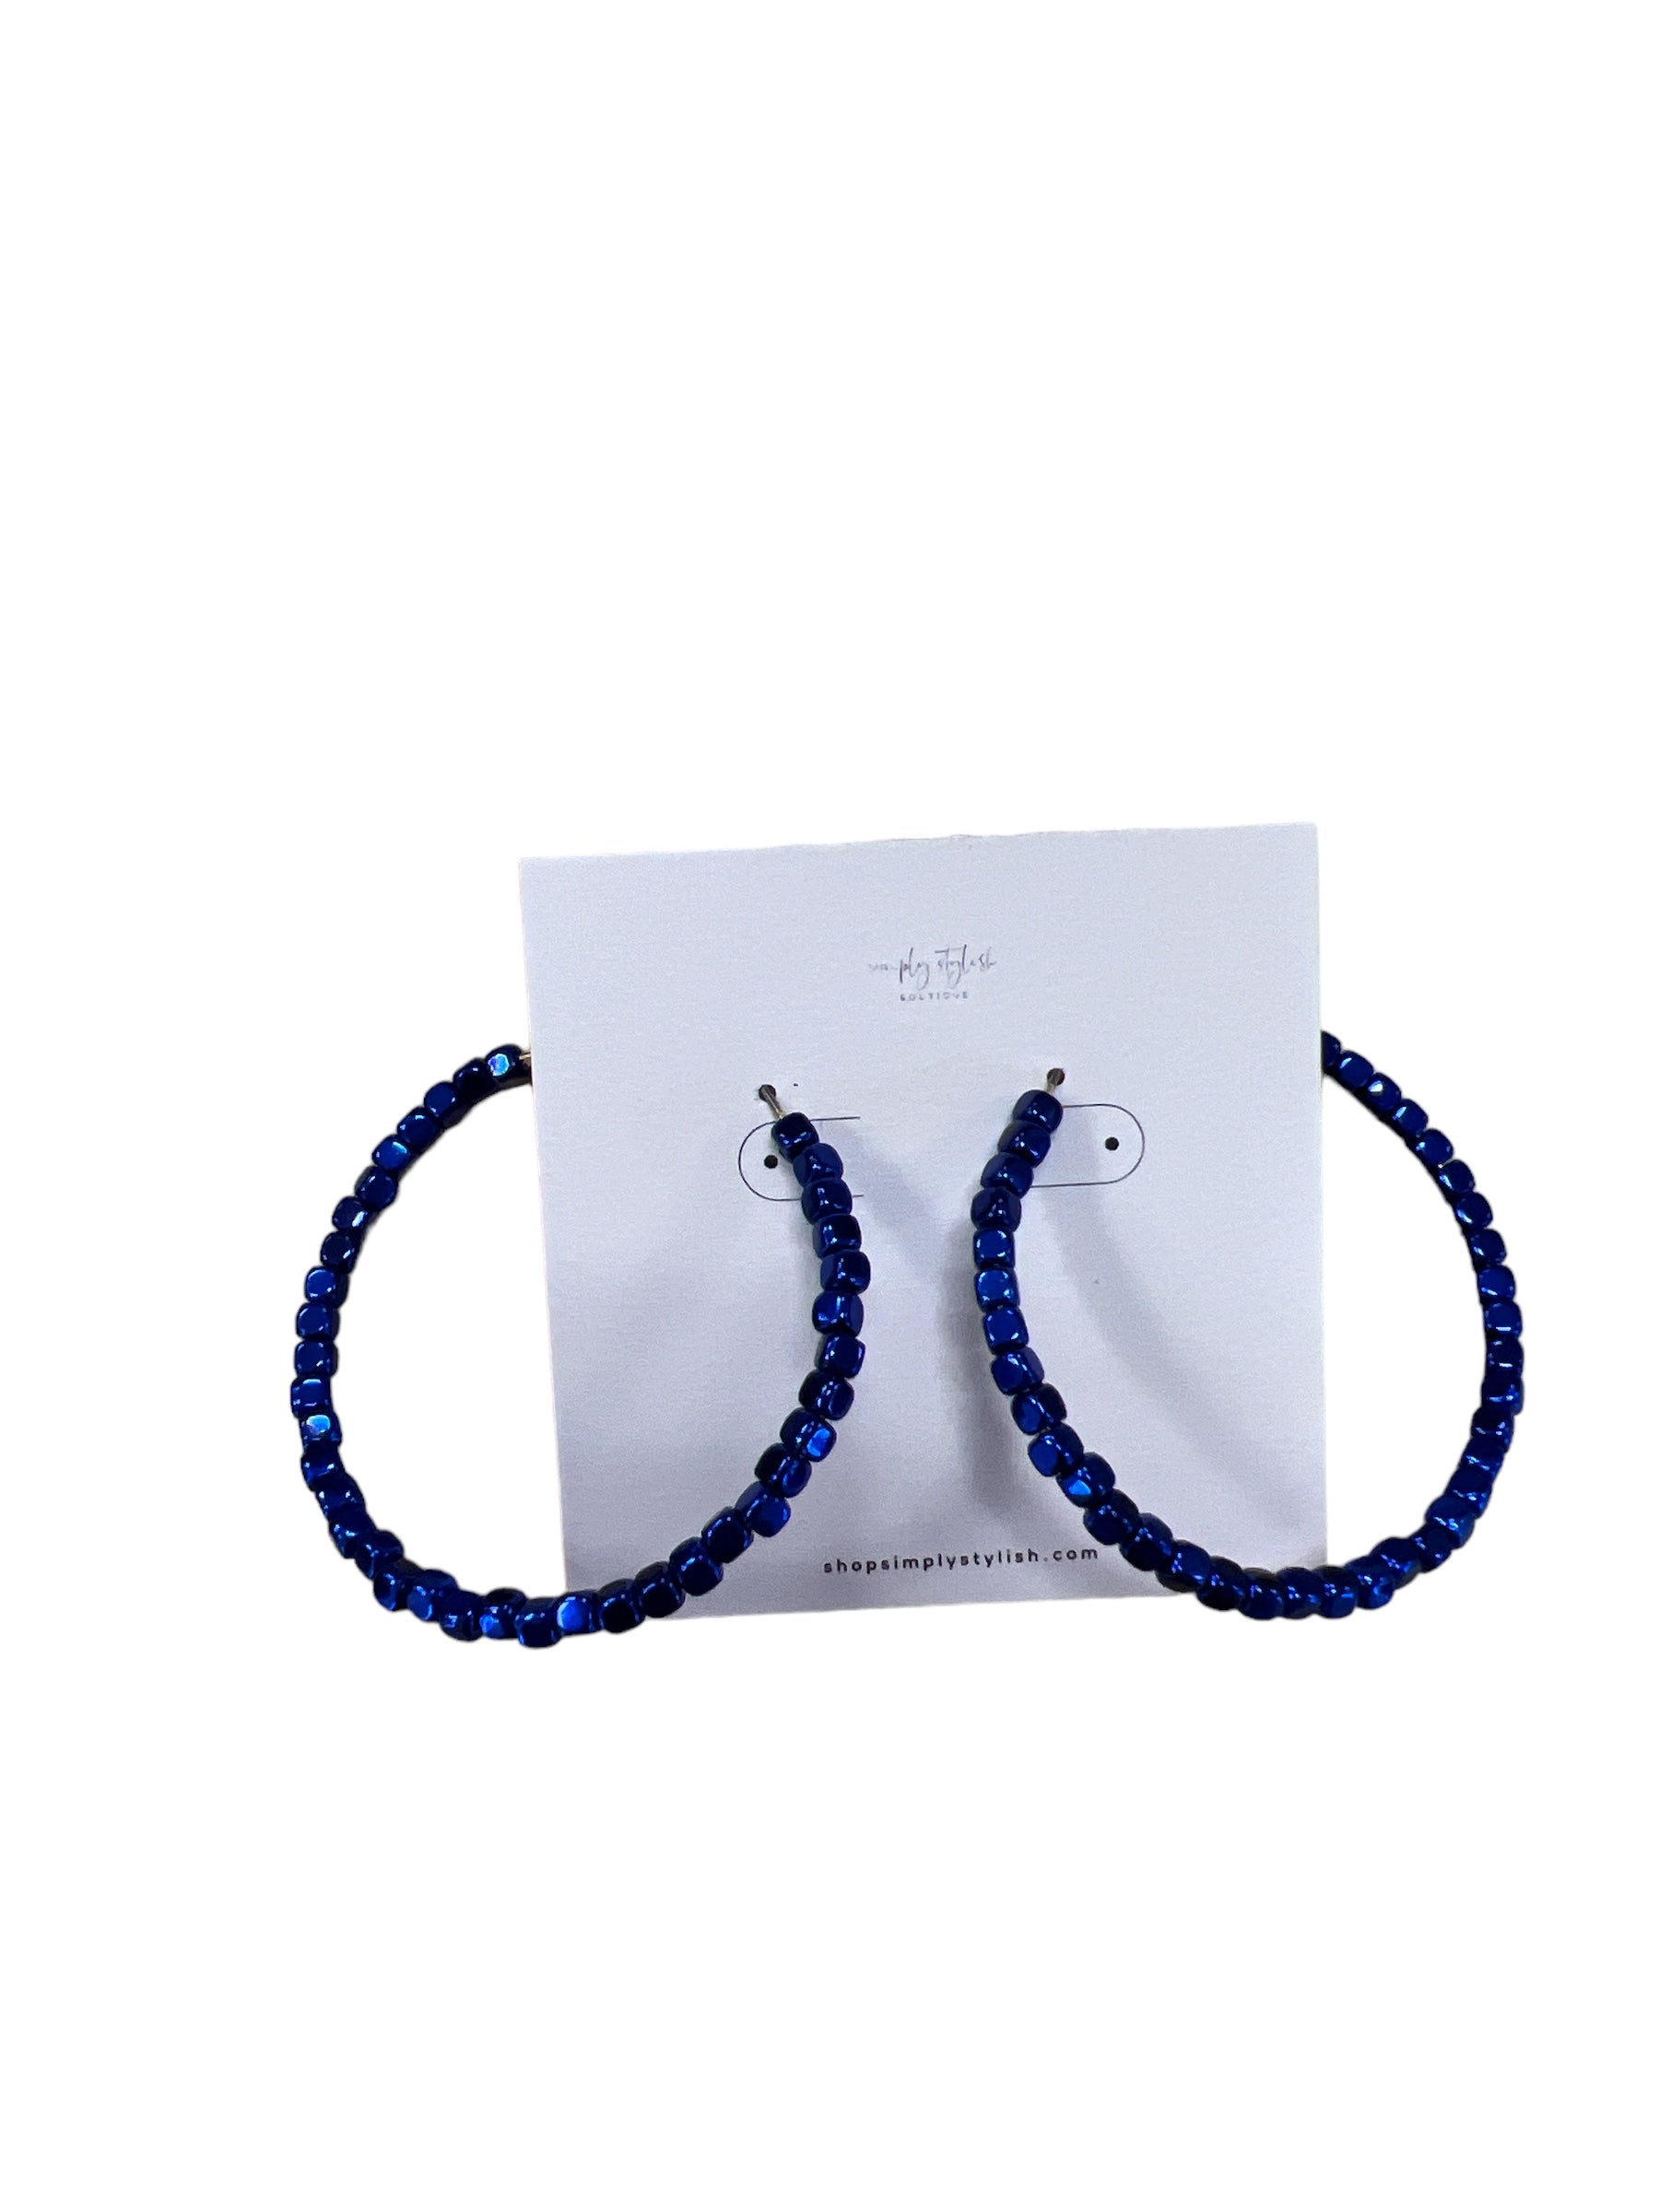 Square Bead Hoops-Simply Stylish Boutique-Simply Stylish Boutique | Women’s & Kid’s Fashion | Paducah, KY